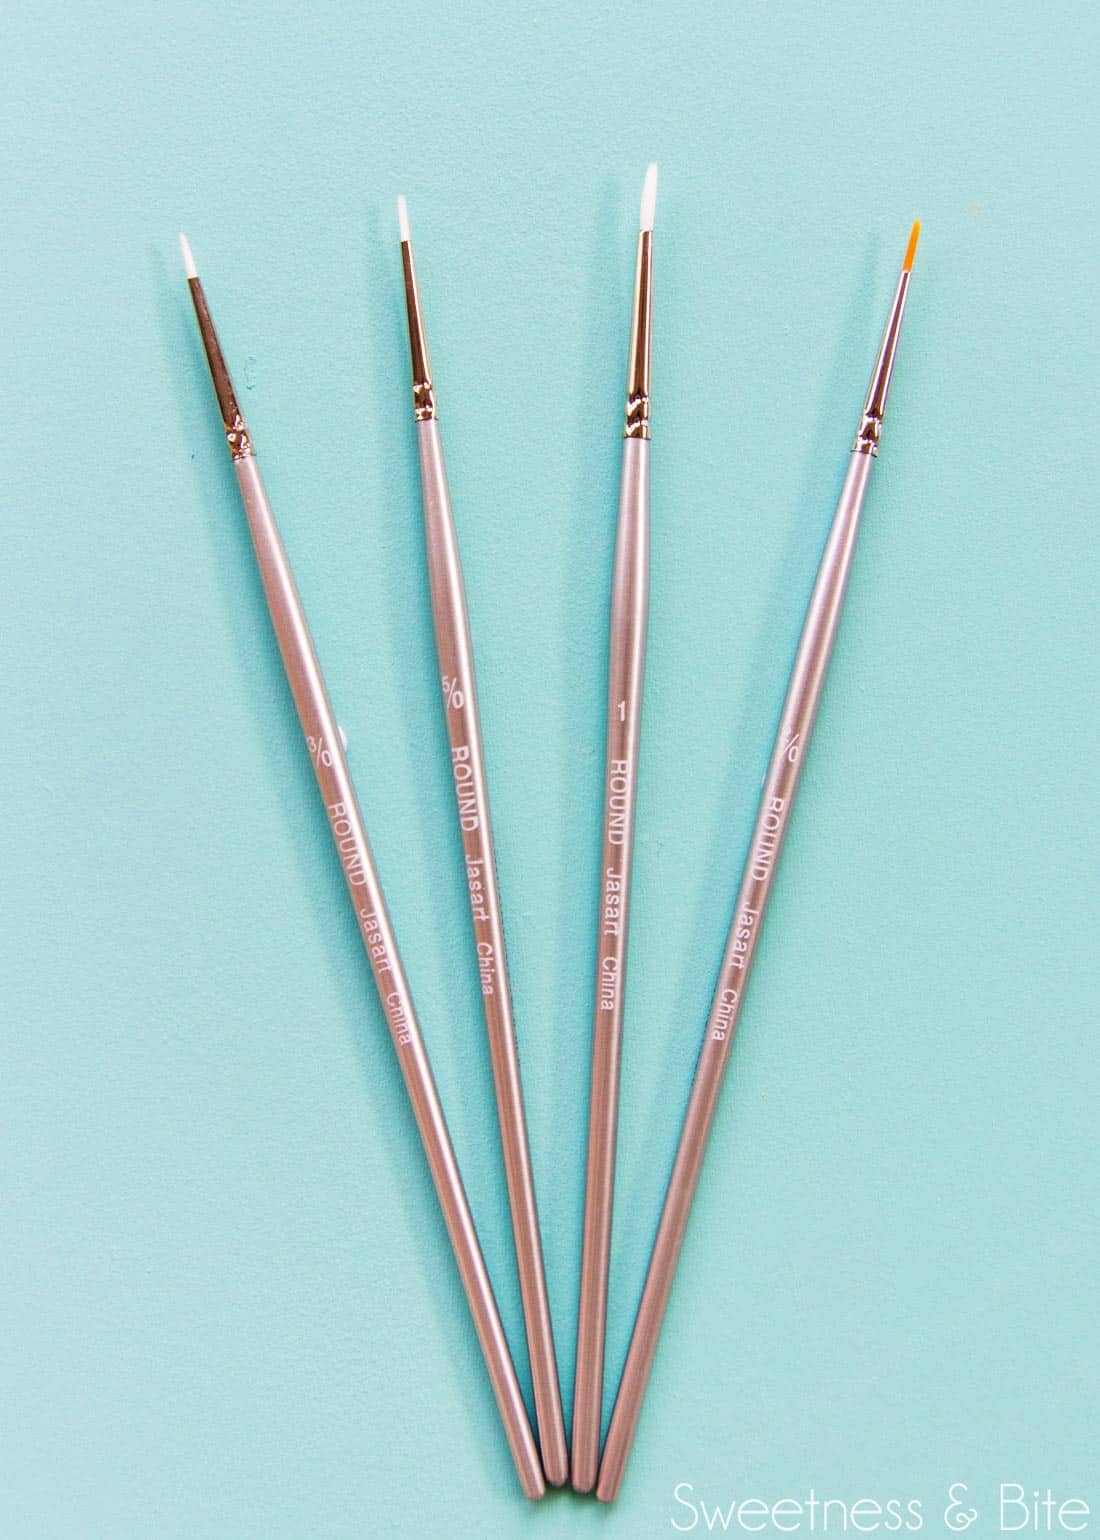 Fine paintbrushes for painting on a cake.